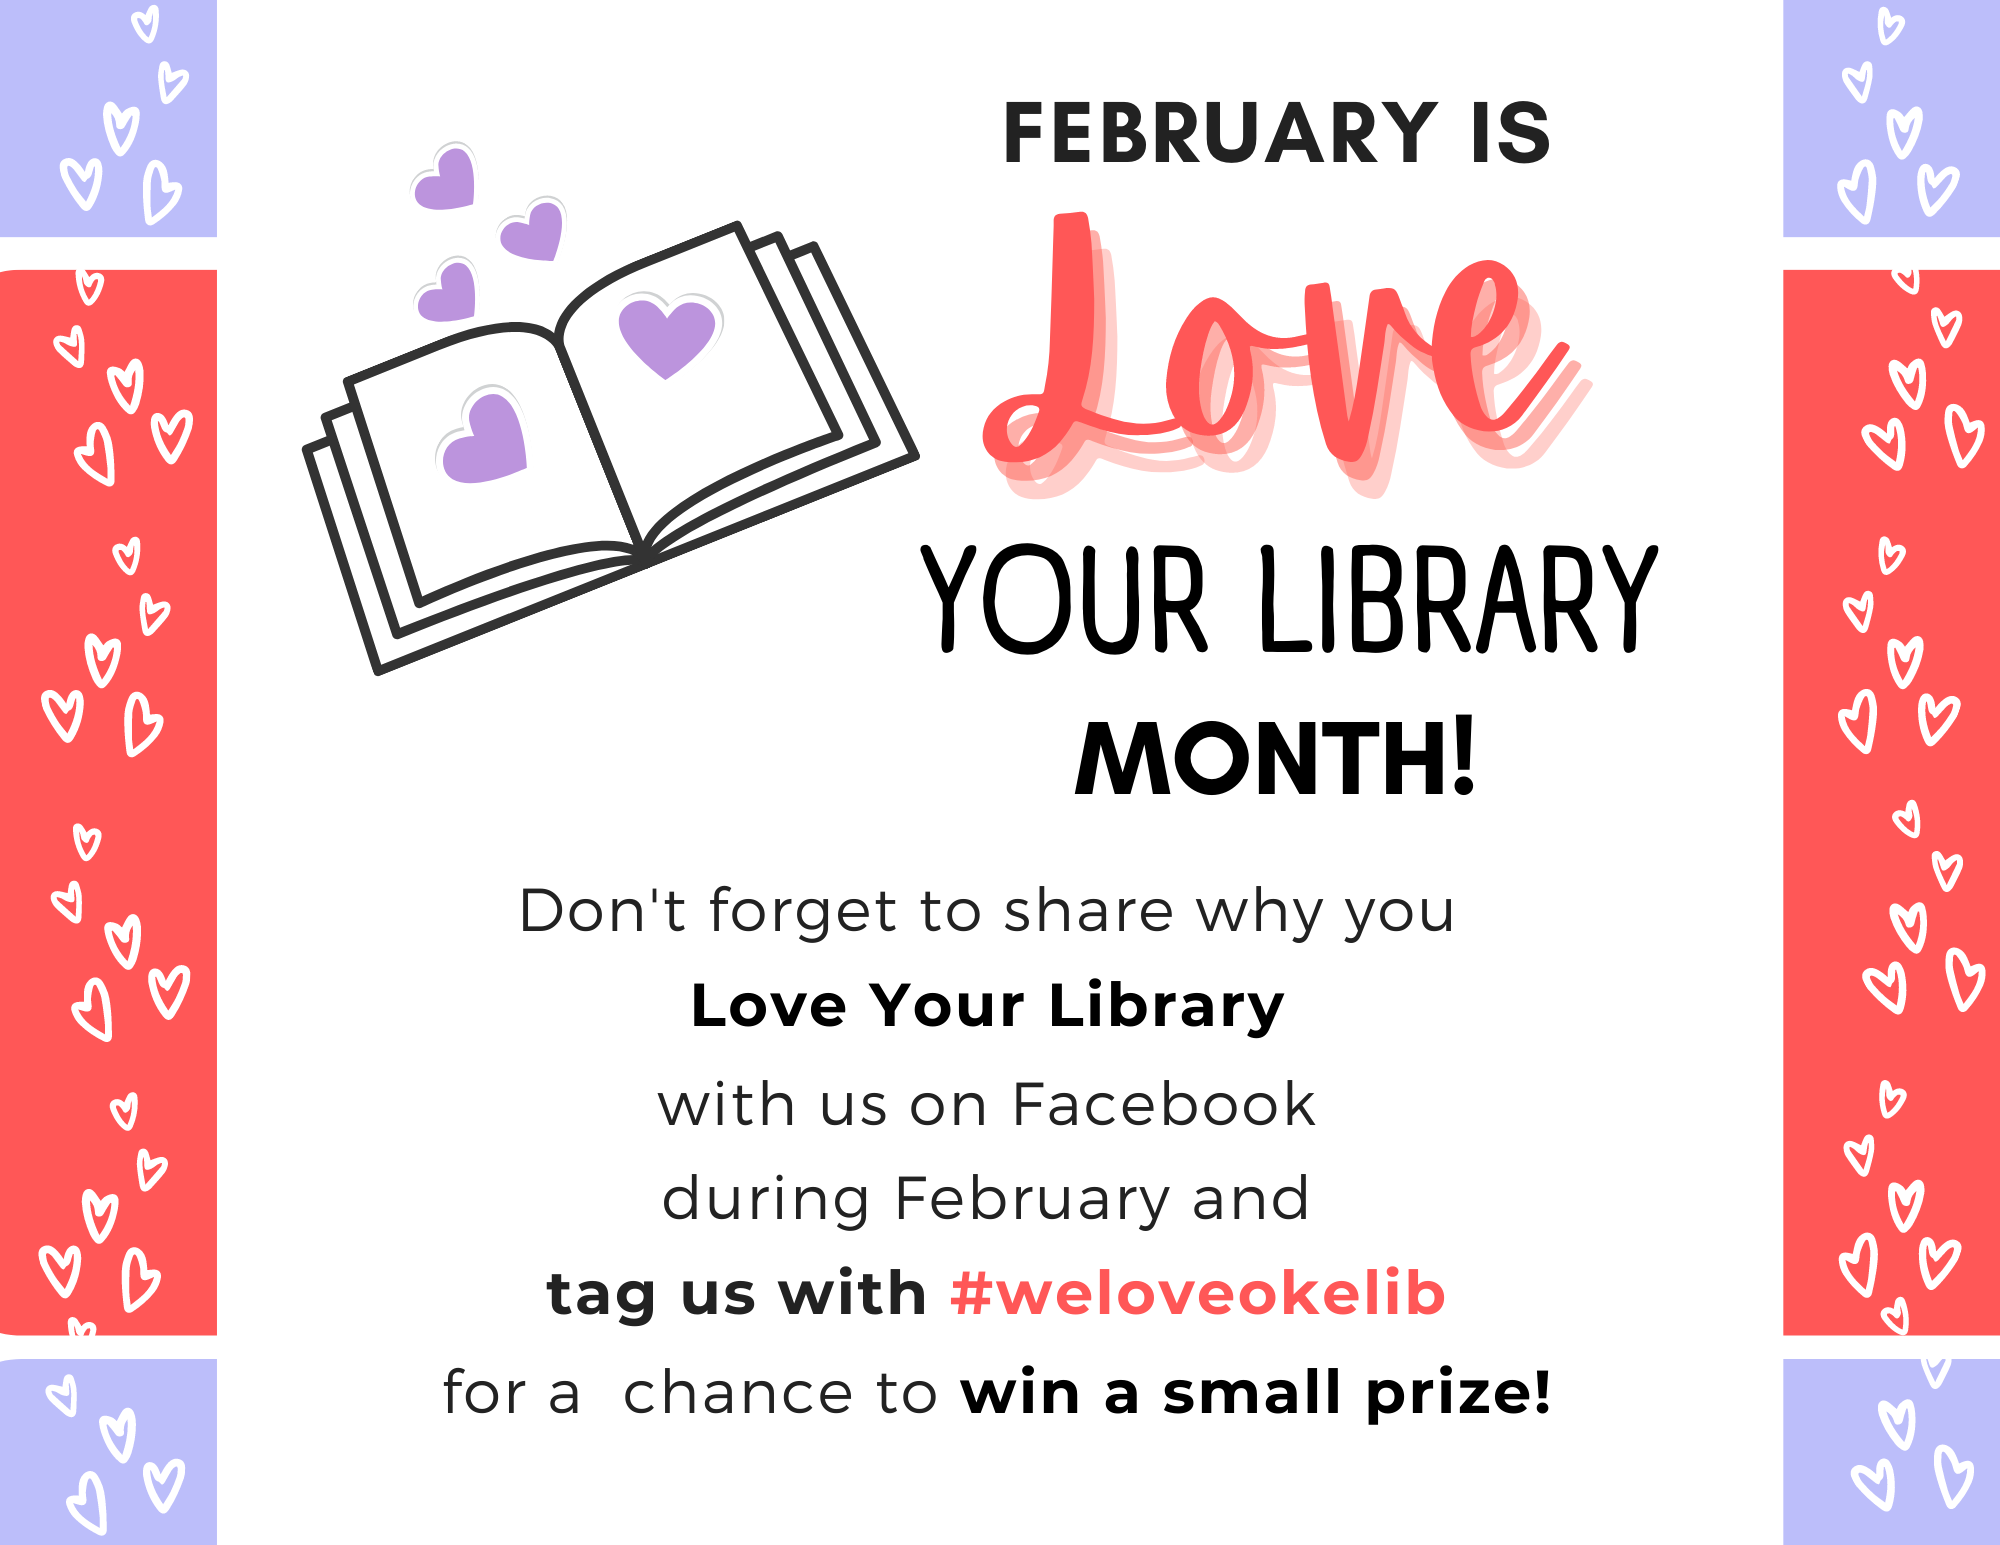 February is Love Your Library Month! Don't forget to share why you Love Your Library with us on Facebook during February and tag us with #weloveokelib for a chance to win a small prize!